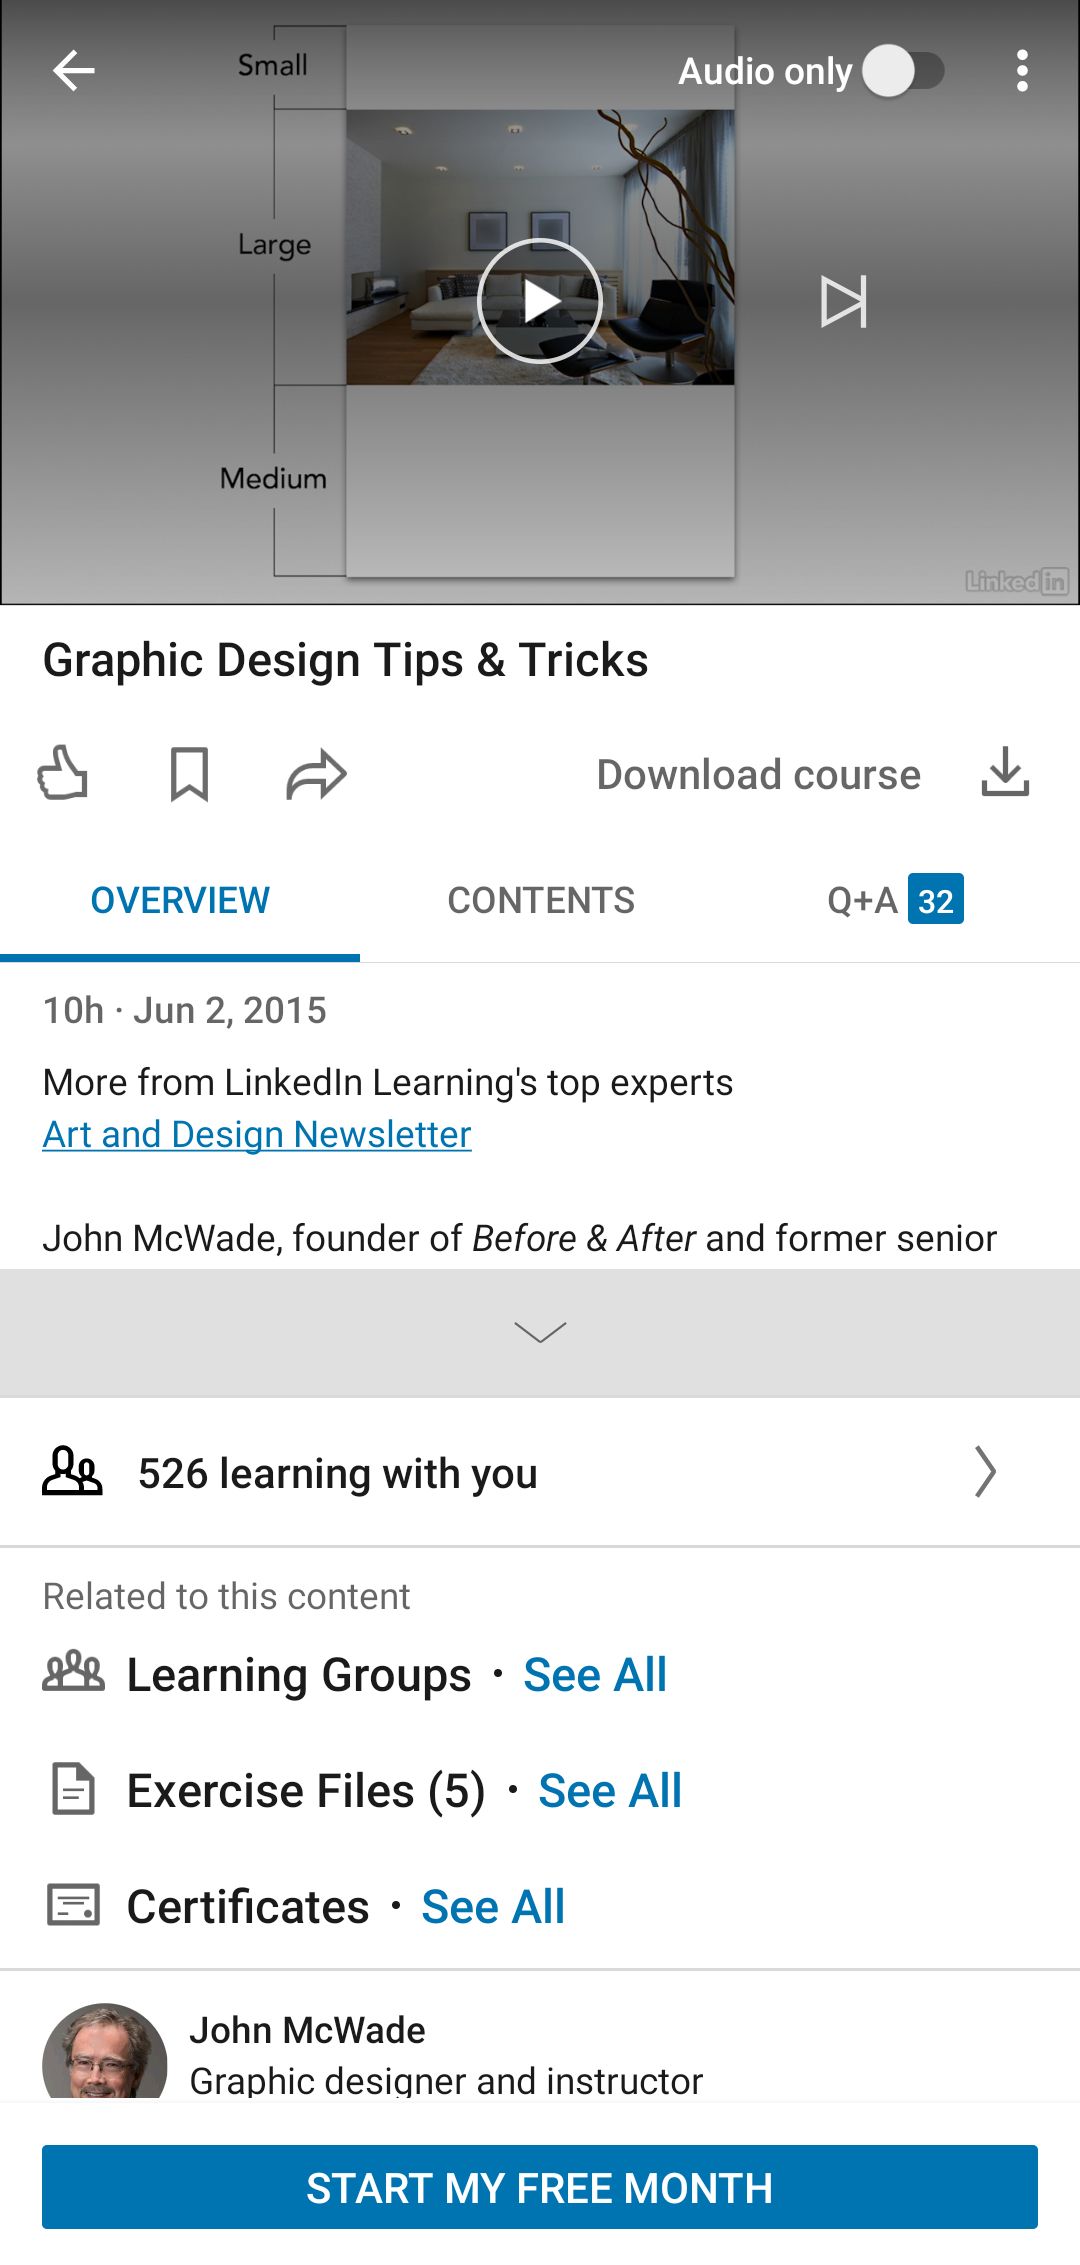 LinkedIn Learning App Overview Tab in Course